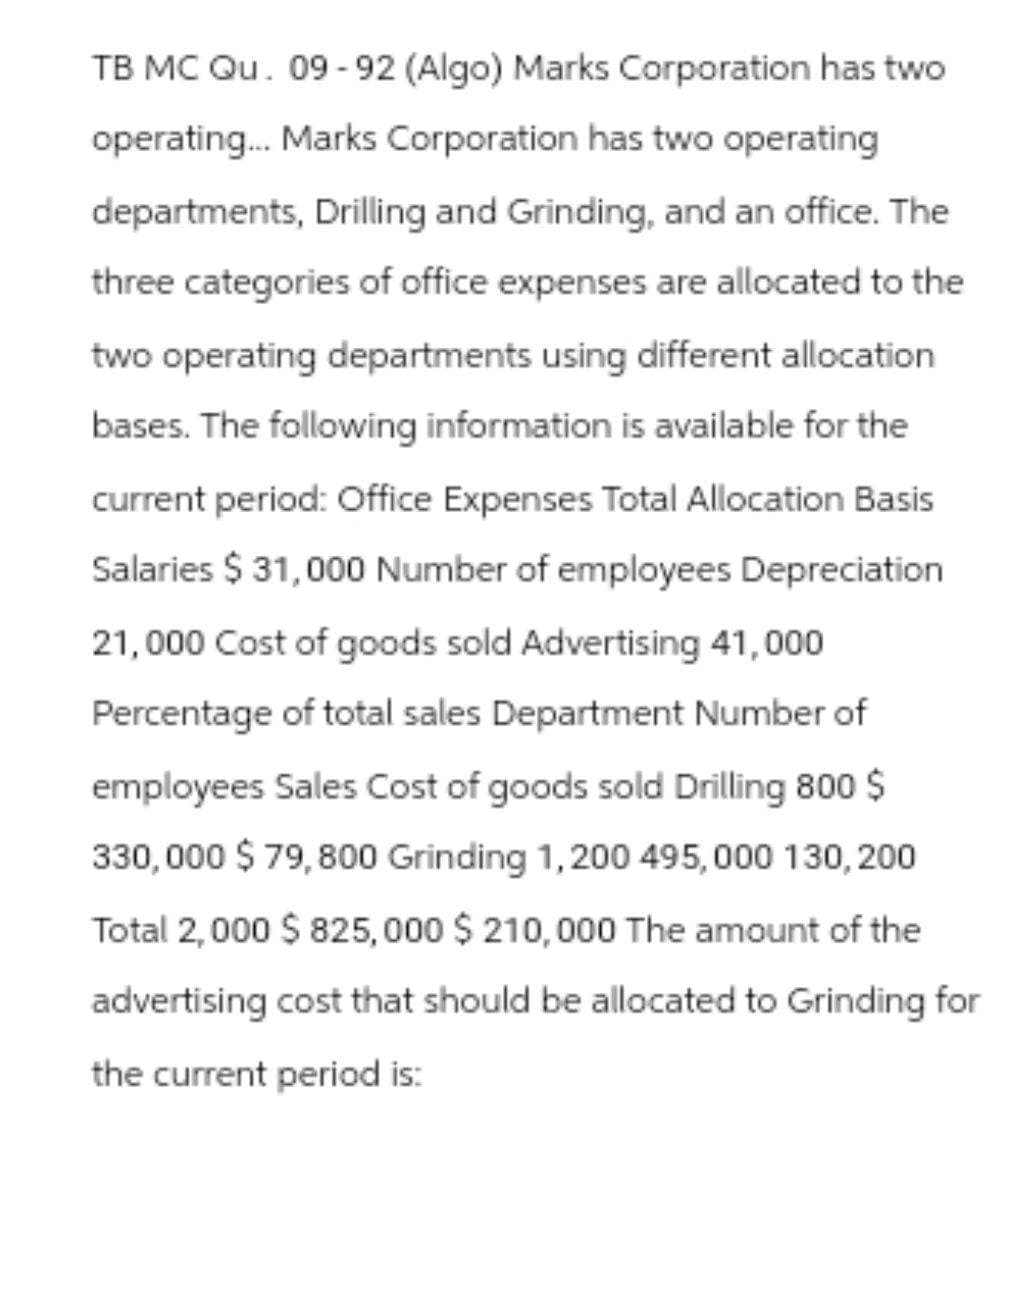 TB MC Qu. 09-92 (Algo) Marks Corporation has two
operating... Marks Corporation has two operating
departments, Drilling and Grinding, and an office. The
three categories of office expenses are allocated to the
two operating departments using different allocation
bases. The following information is available for the
current period: Office Expenses Total Allocation Basis
Salaries $ 31,000 Number of employees Depreciation
21,000 Cost of goods sold Advertising 41,000
Percentage of total sales Department Number of
employees Sales Cost of goods sold Drilling 800 $
330,000 $ 79,800 Grinding 1,200 495,000 130, 200
Total 2,000 $ 825,000 $ 210,000 The amount of the
advertising cost that should be allocated to Grinding for
the current period is: